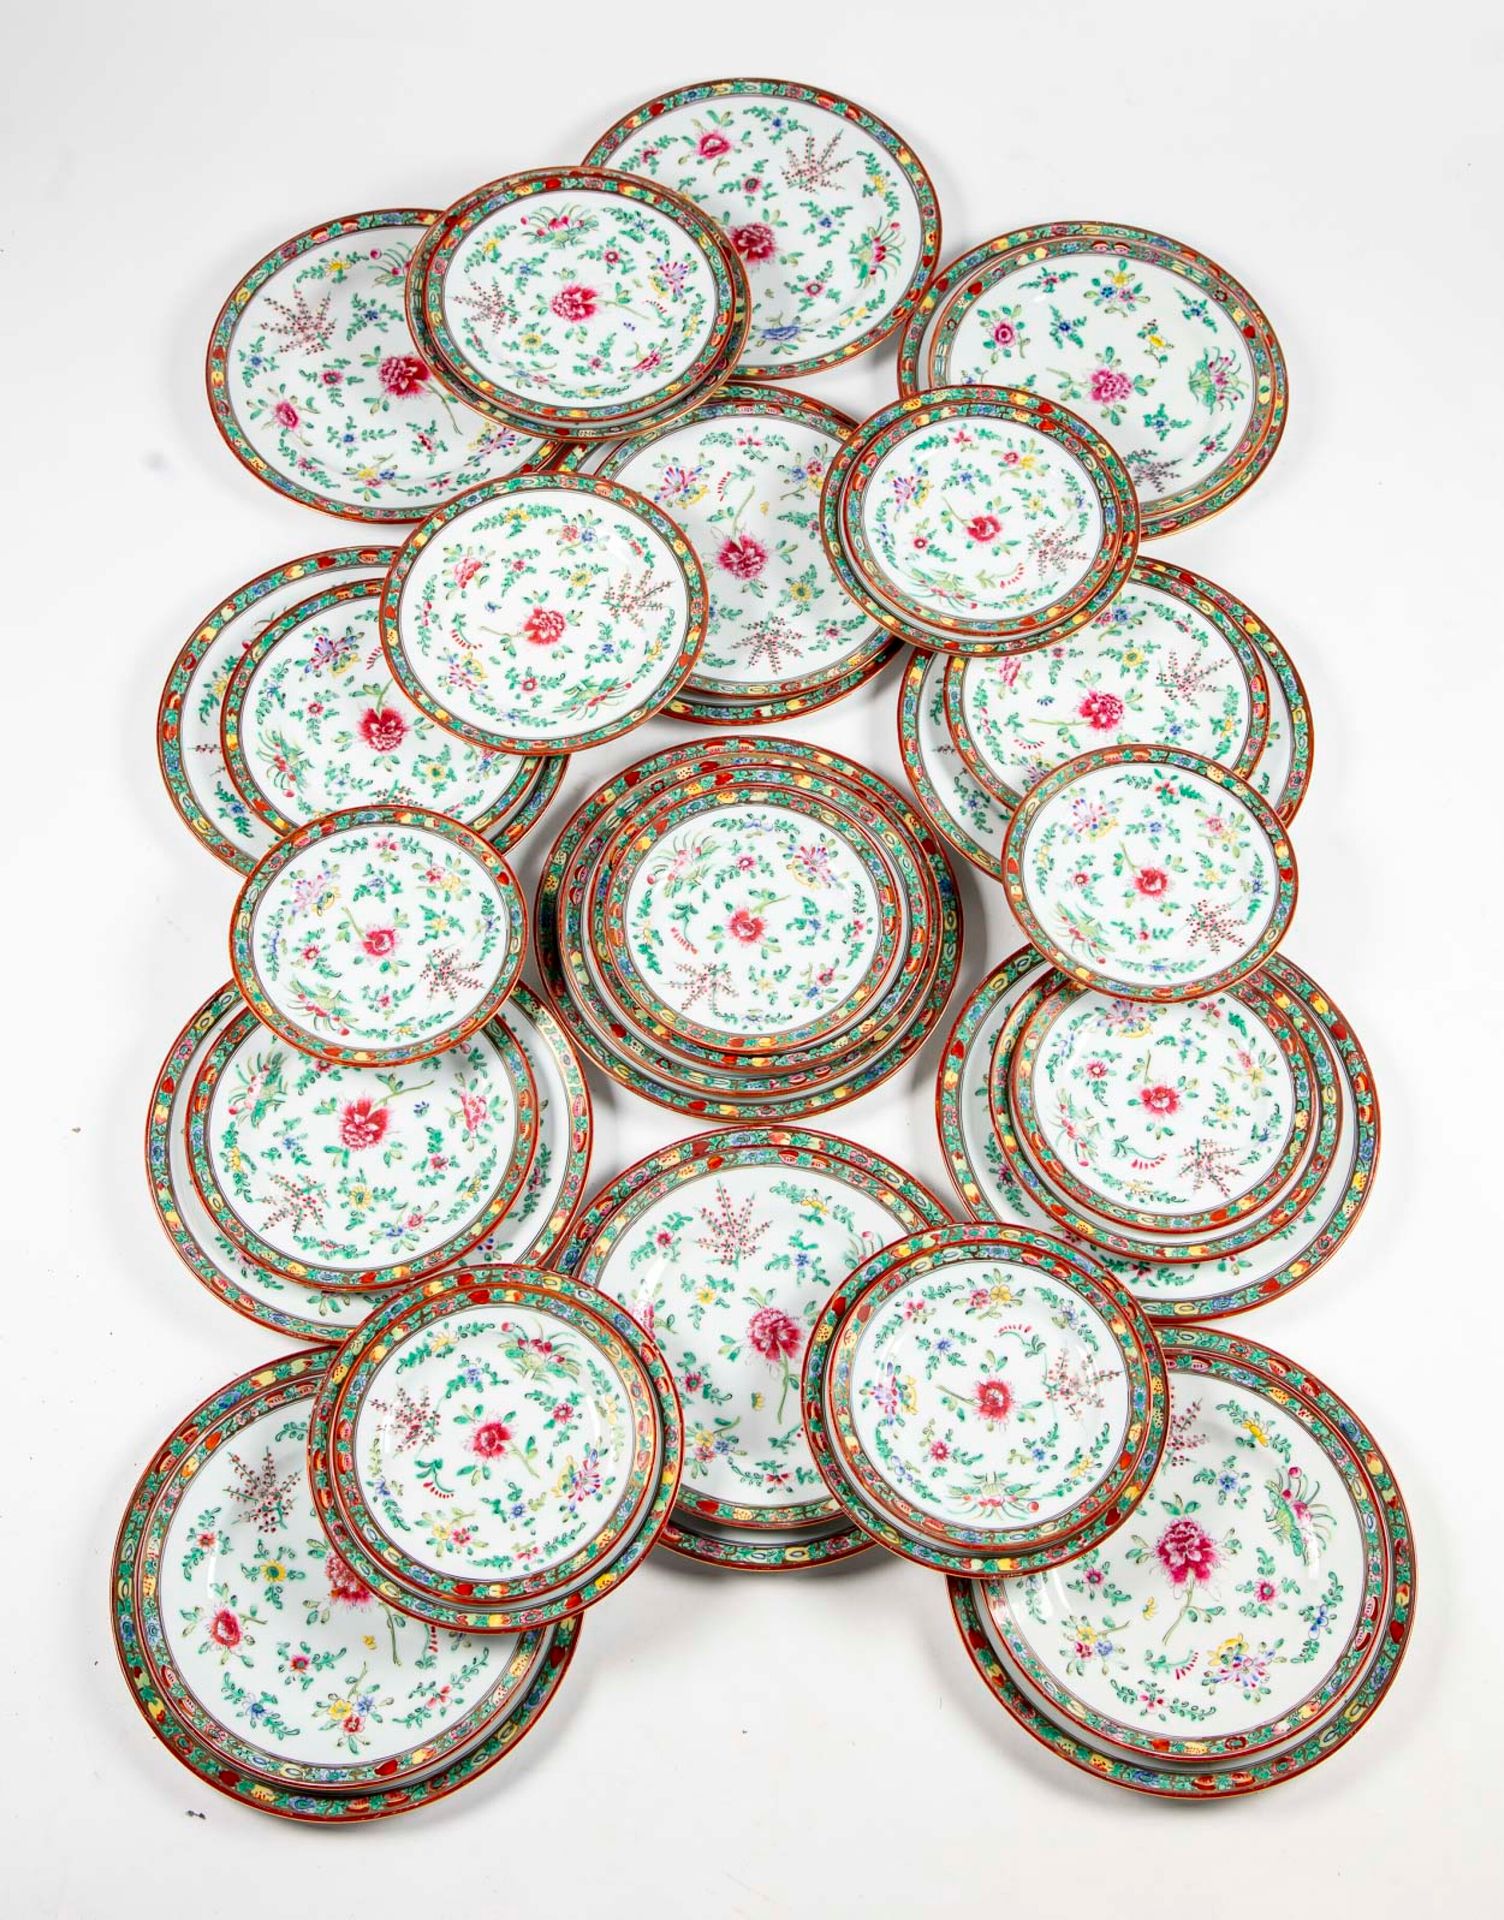 CHINE CHINA - 20th century

Porcelain plate set with polychrome enamelled decora&hellip;